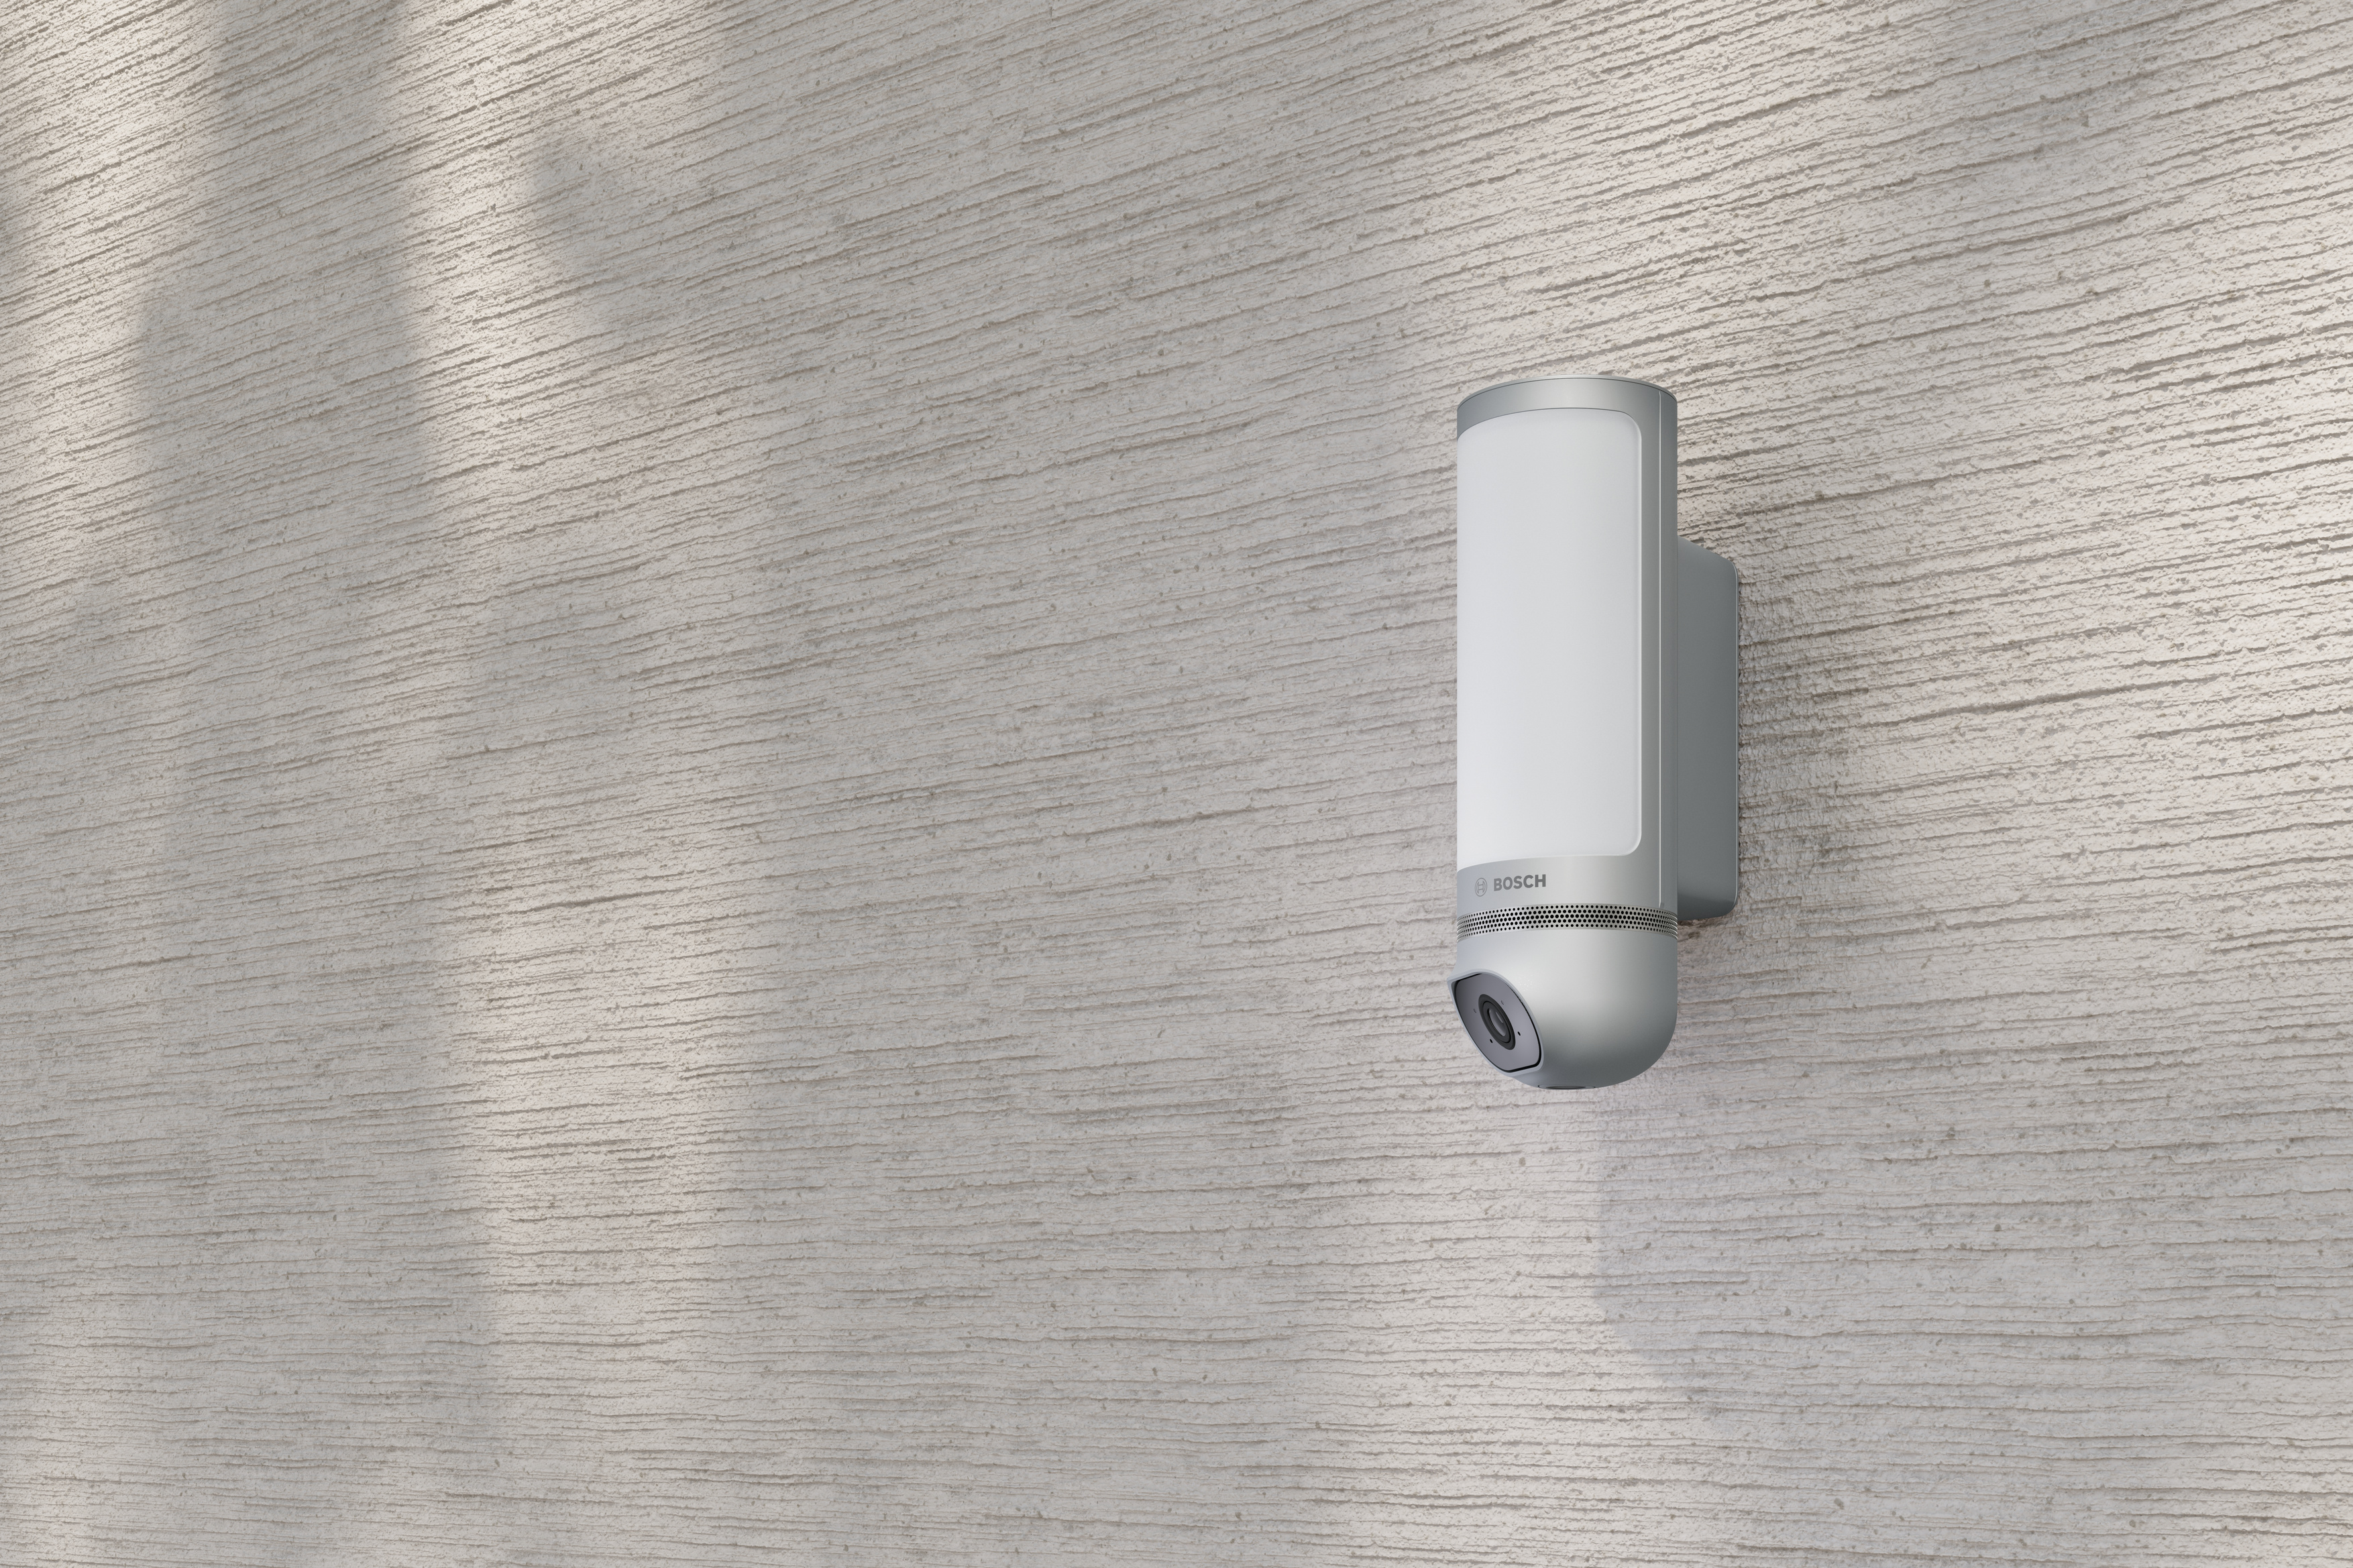 Security With Award-Winning Design – The new Bosch Smart Home Eyes Outdoor Camera II